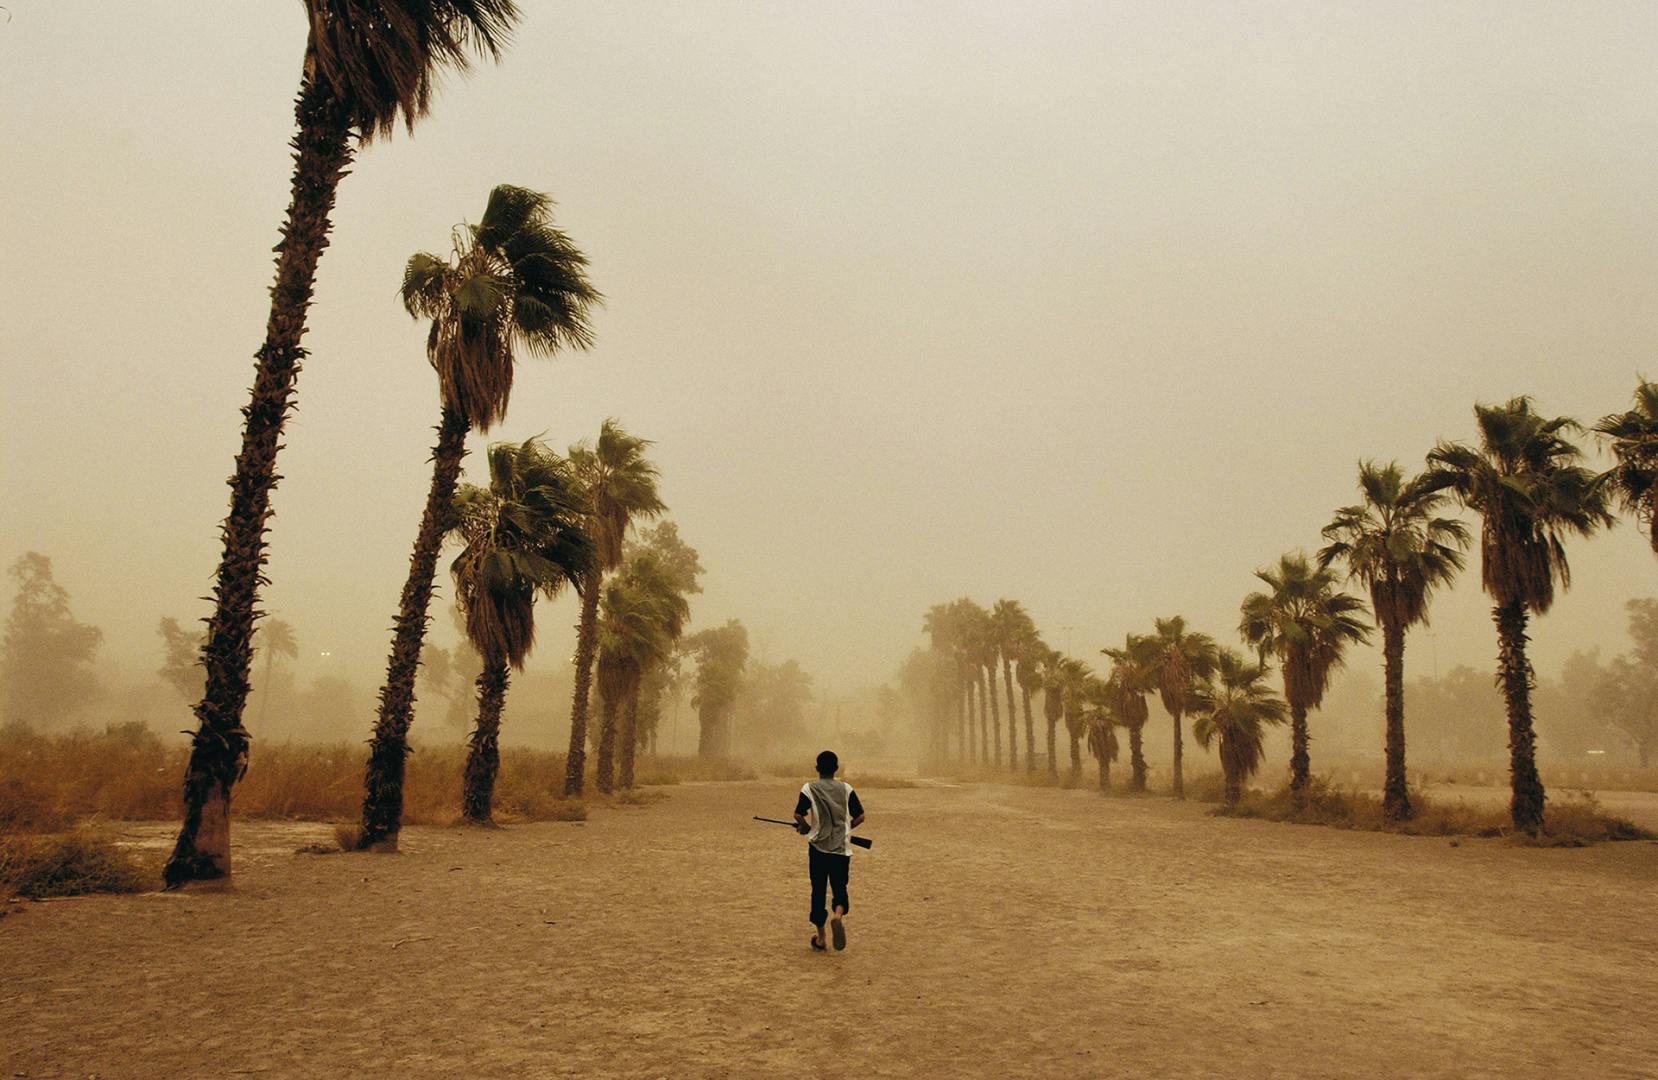 Photograph of a young person holding a gun while walking away from the camera in a dusty tree-lined landscape, taken from Glad Tidings of Benevolence by Moises Saman